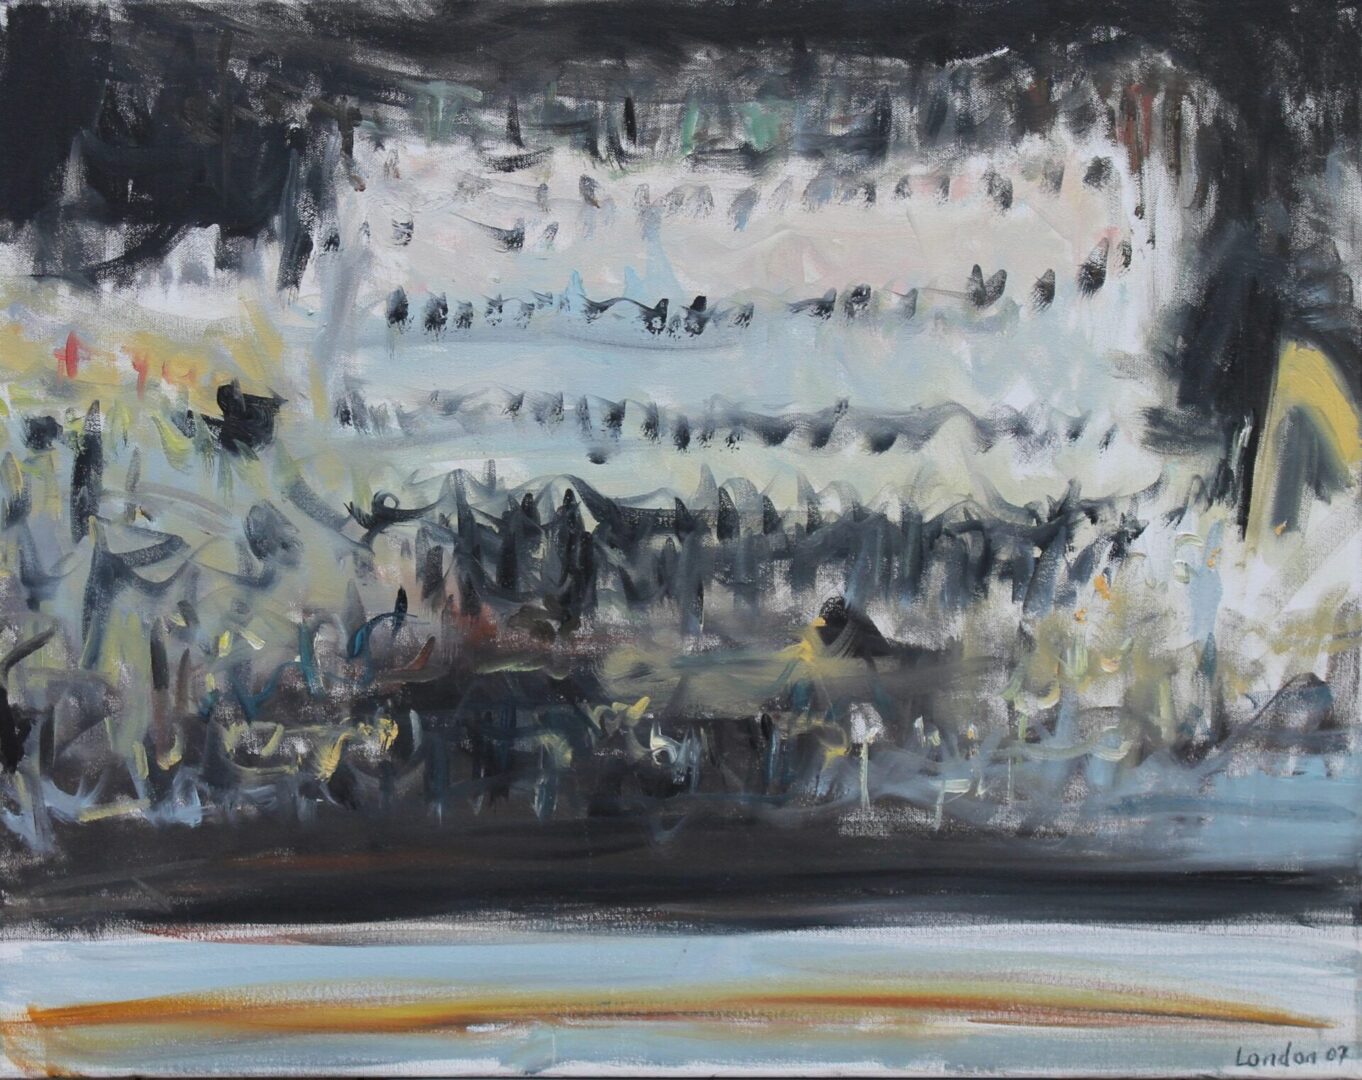 An abstract painting of a choir